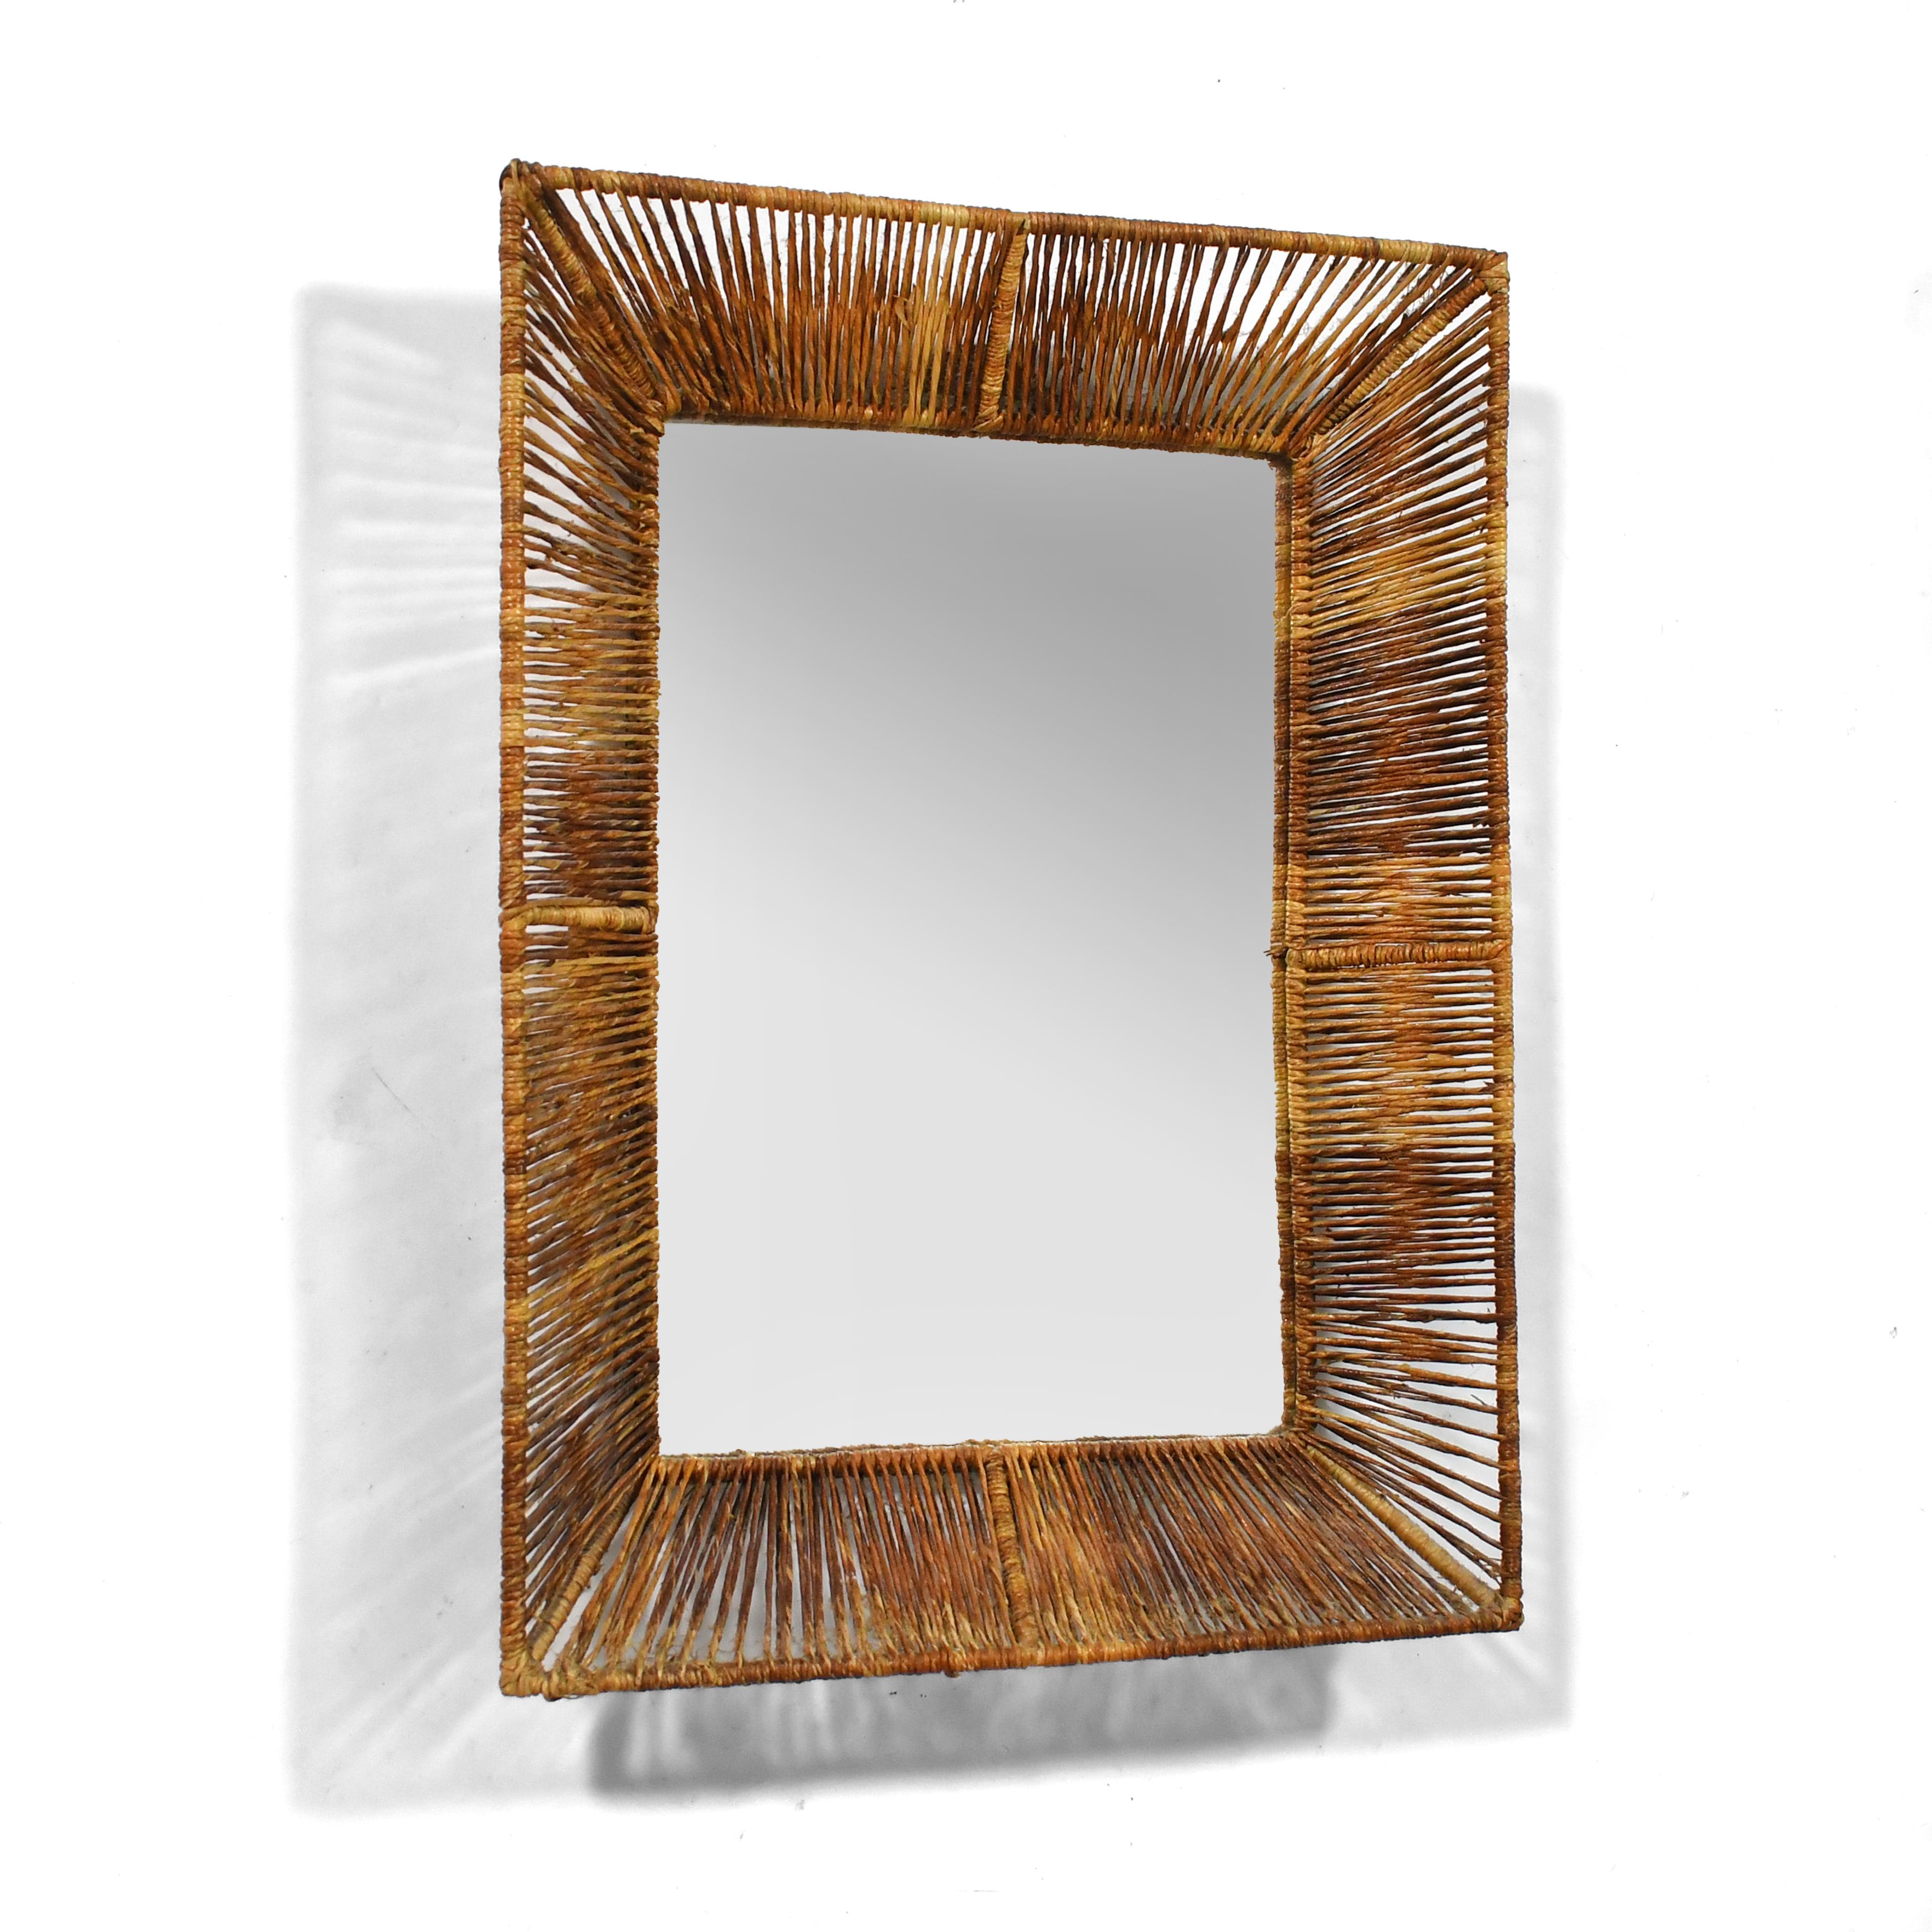 This lovely little wall mirror has an iron frame wrapped in papercord creating delightful shadow-play and giving it a wonderful texture and organic modern quality. It is marked with a Raymor label, and uses the same materials and techniques that